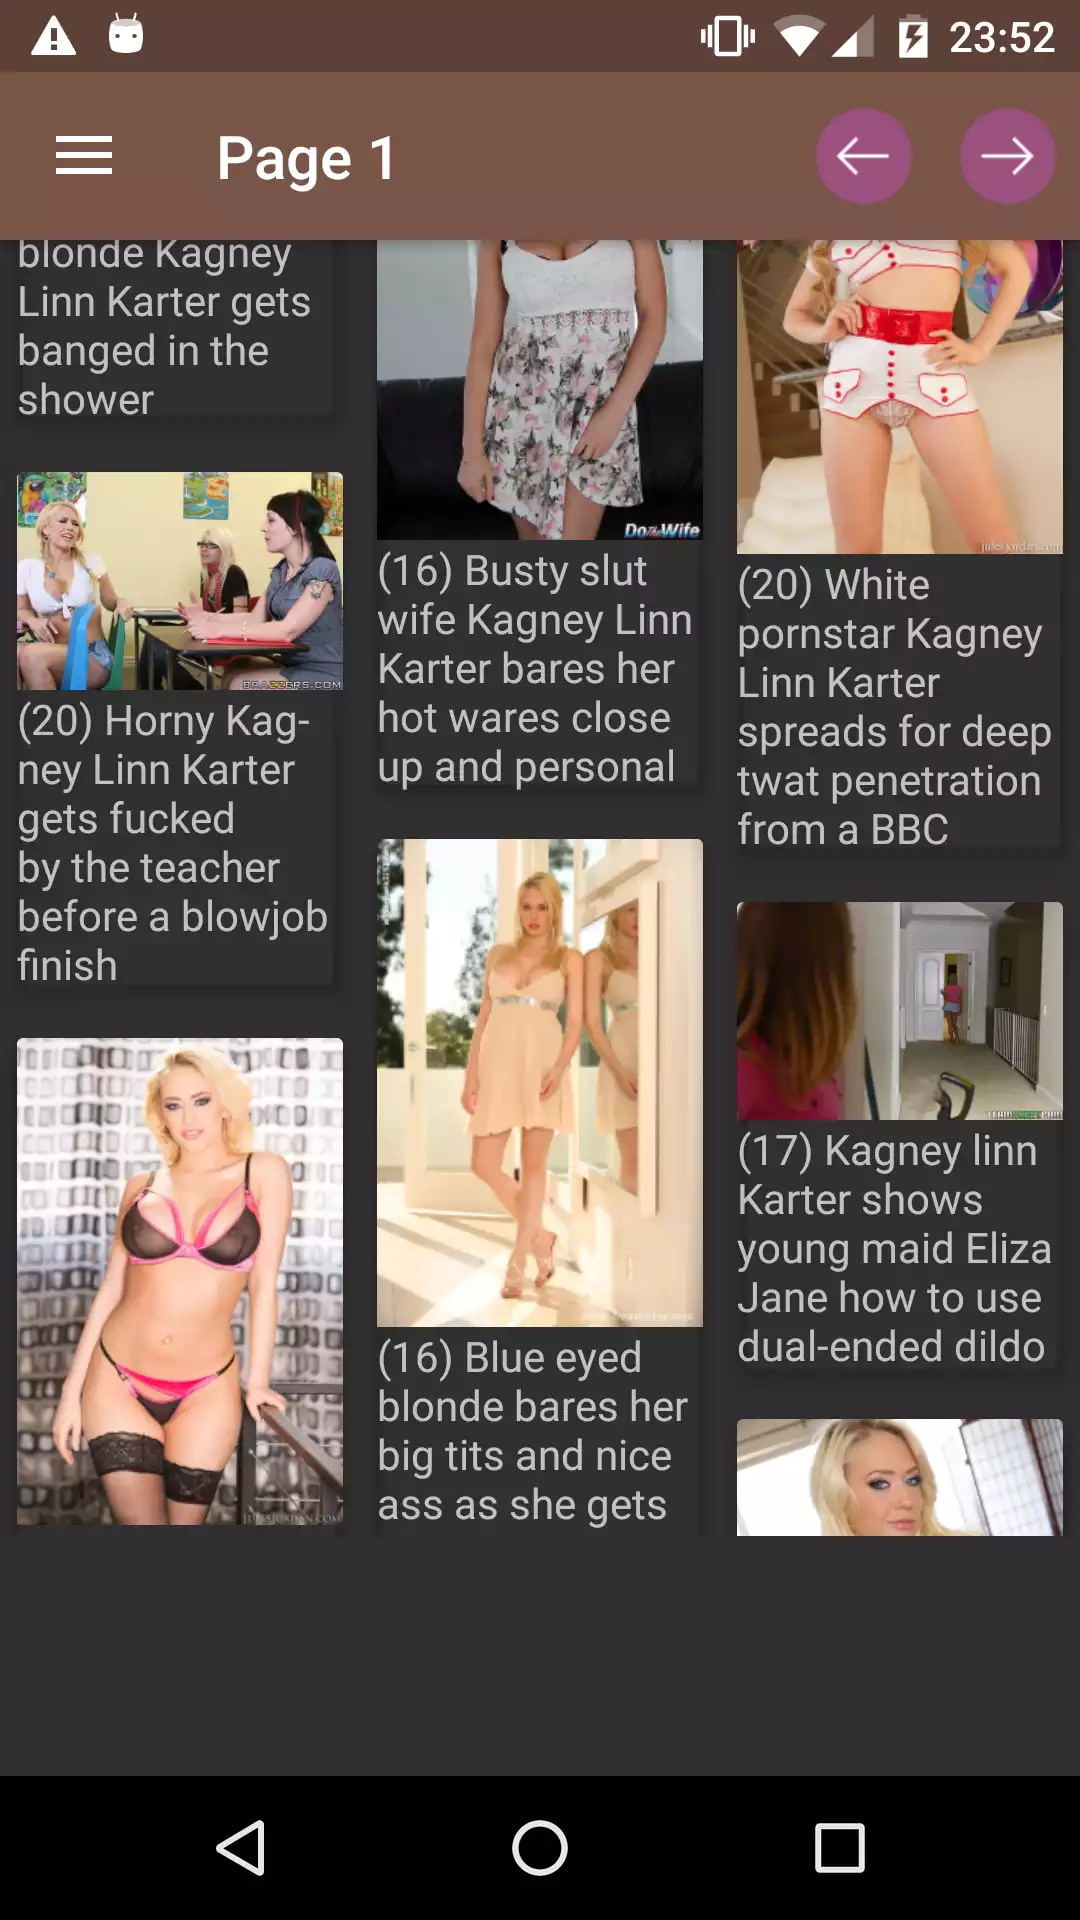 Kagney Linn nhentai,collection,app,photos,free,hot,porn,daily,galleries,pornstars,hentai,titties,adultwallpapers,apps,for,sexy,gallery,download,image,caprice,viewer,pegging,apk